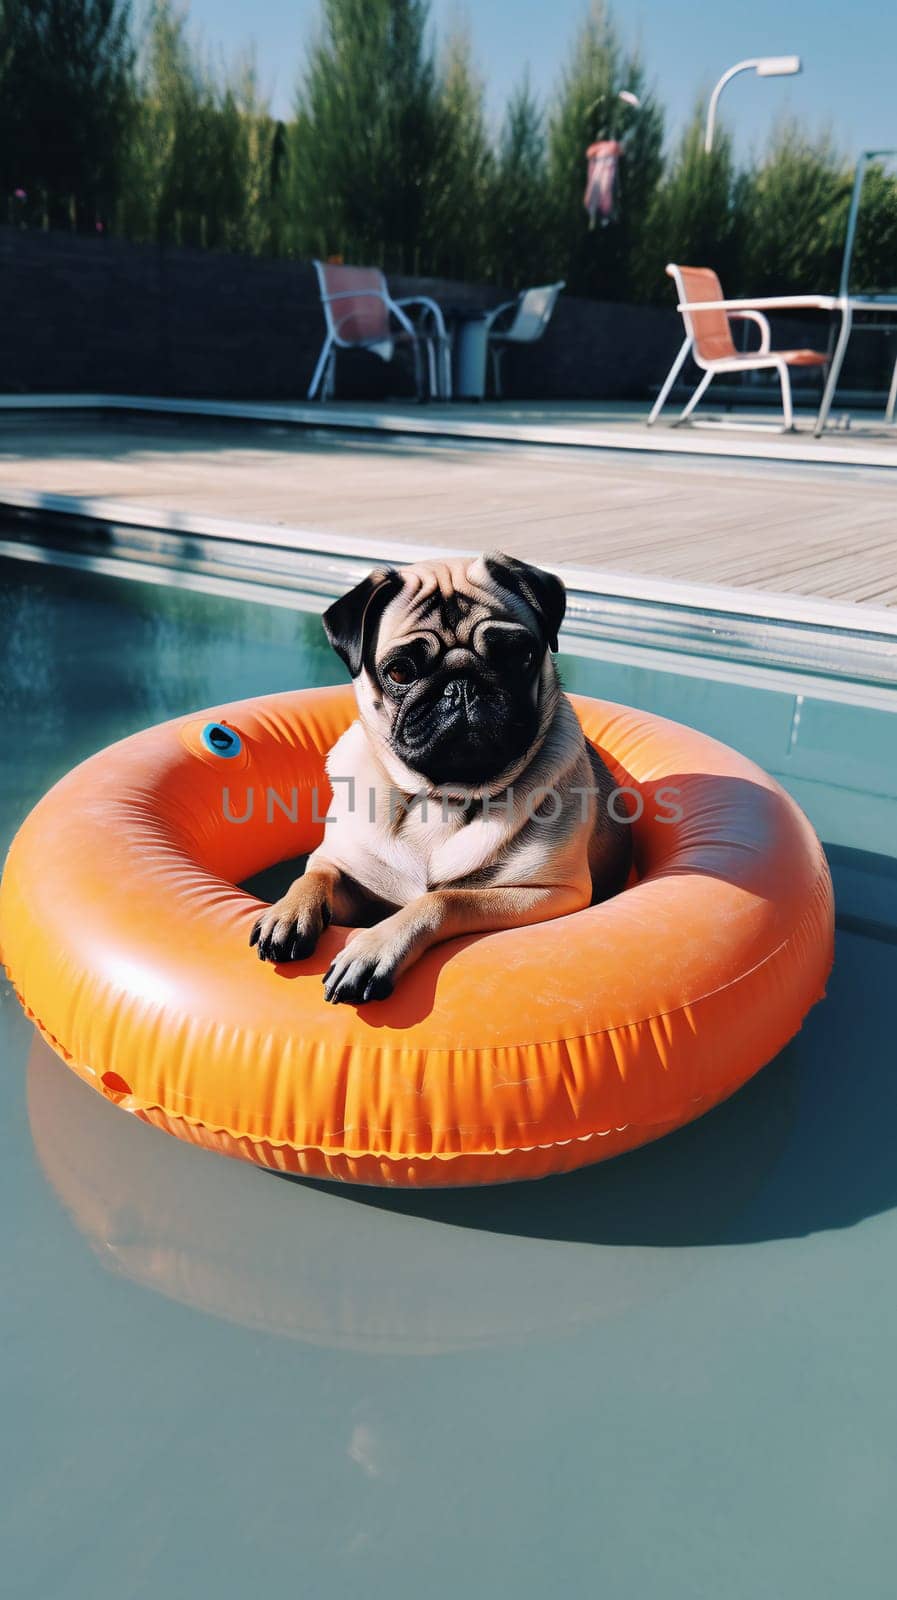 Cute pug dog floating in a swimming pool with an orange ring flotation device.